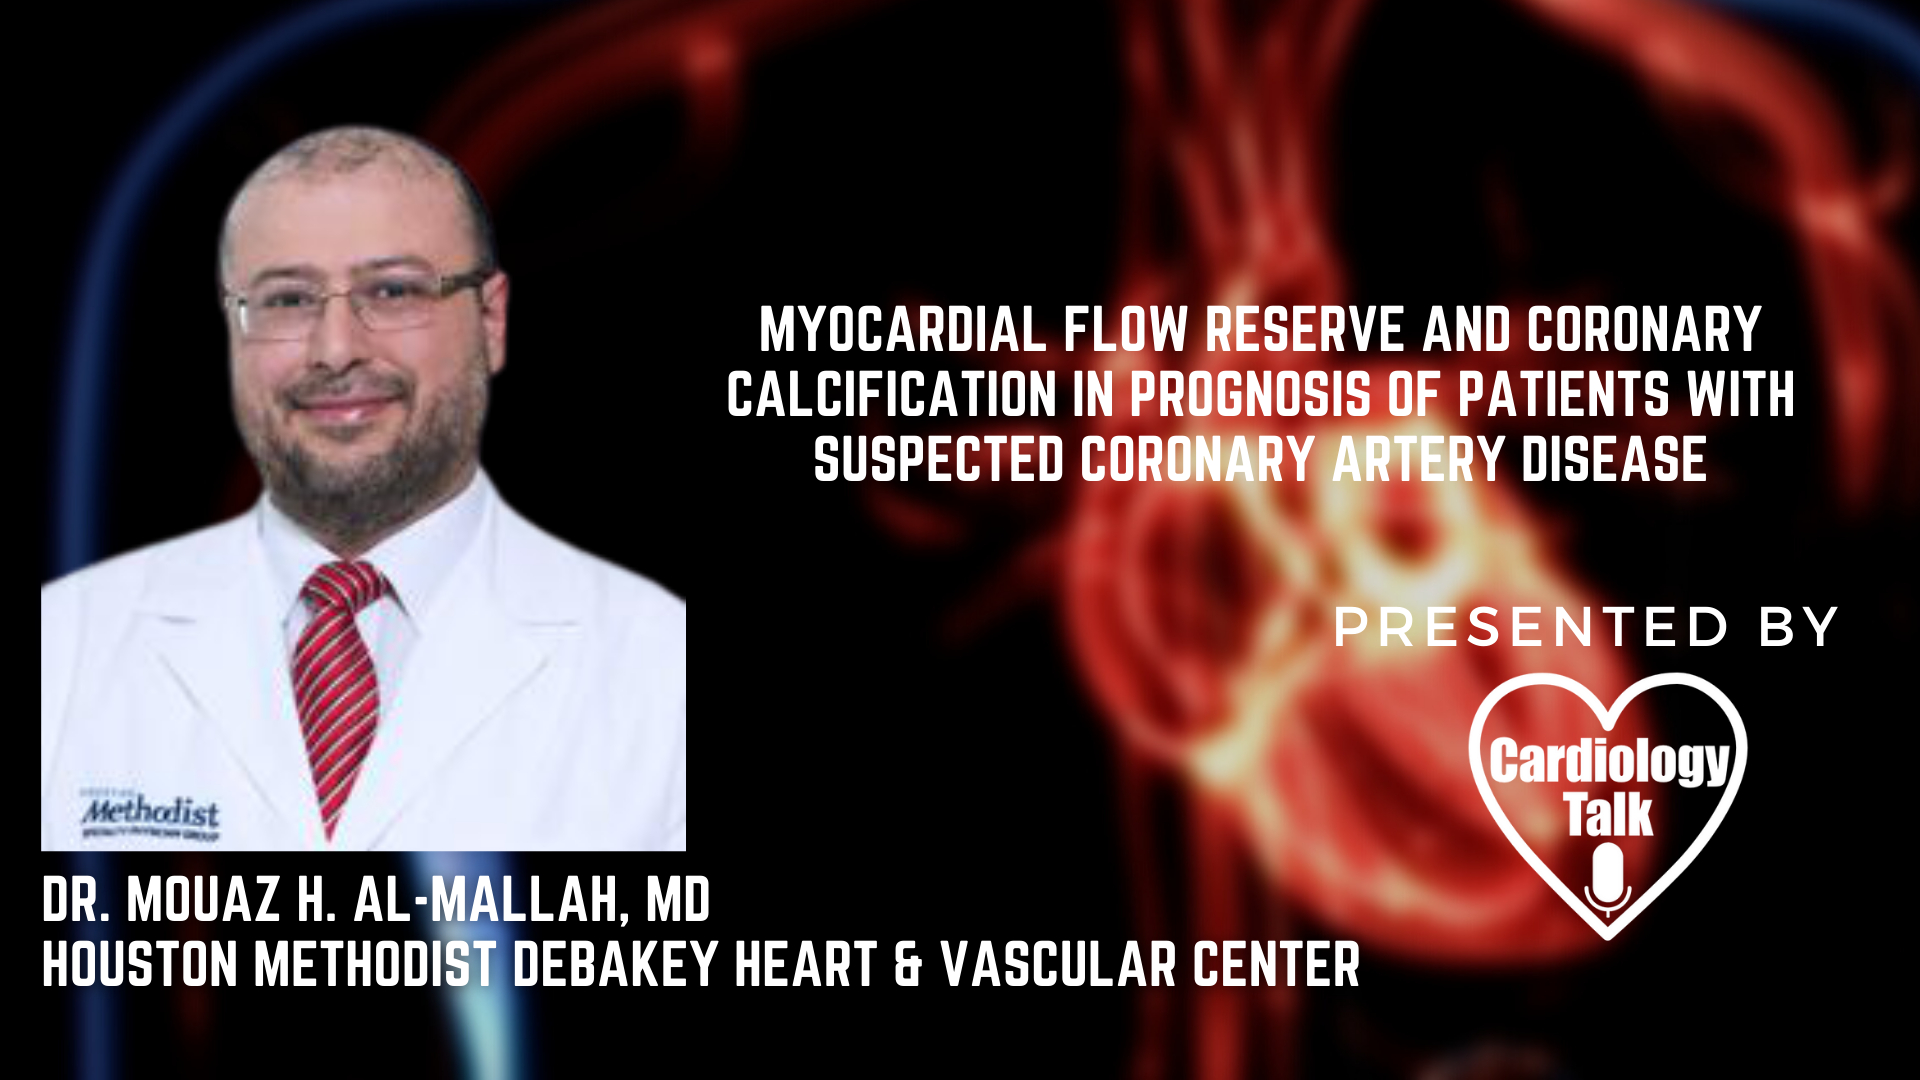 Dr. Mouaz H. Al-Mallah, MD-Myocardial Flow Reserve and Coronary Calcification in Prognosis of Patients With Suspected Coronary Artery Disease @almallahmo  #CoronaryArteryDisease #Cardiolo...